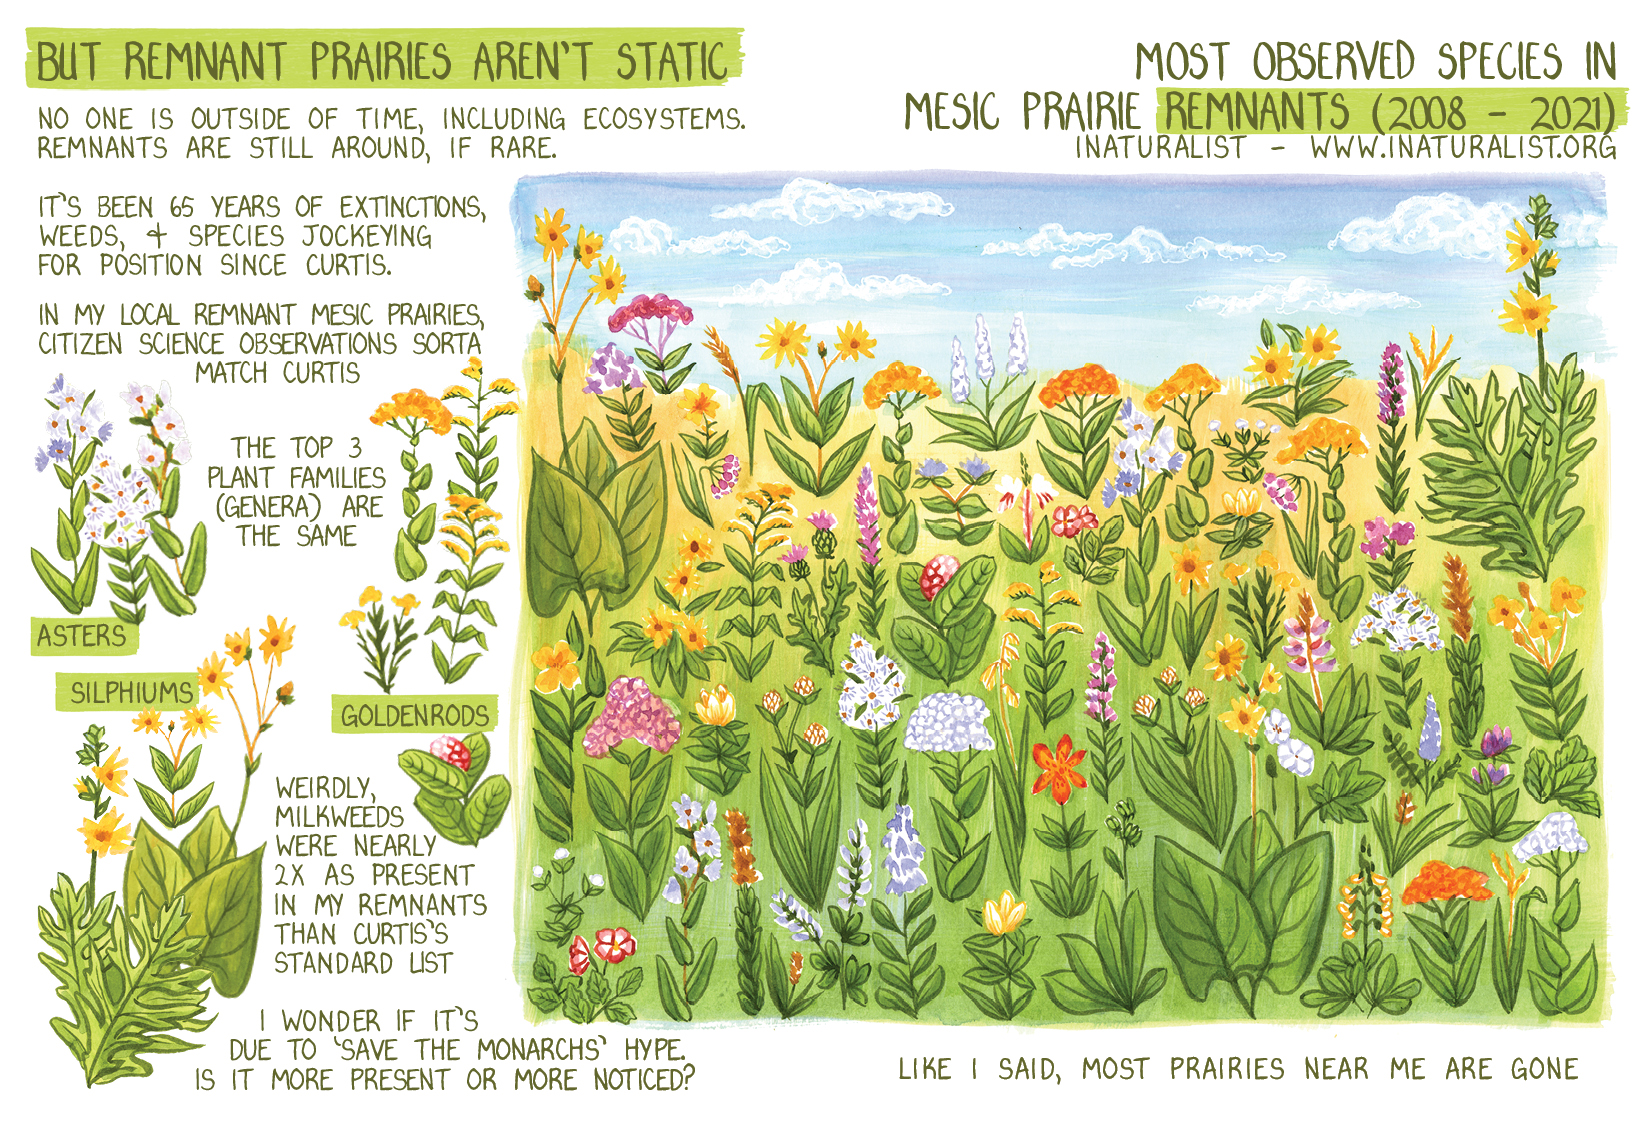 Another exploded rendering of a prairie in it’s diversity based on citizen reported species observations with community sourced IDs, depicting about 40 plants, with repeat appearances by species that observations listed as more common, reflected by statistics.  But remnant prairies aren’t static.  No one is outside of time, including ecosystems. Remnants are still around, if rare.  It’s been 65 years of extinctions, weeds, and species jockeying for position since Curtis.  